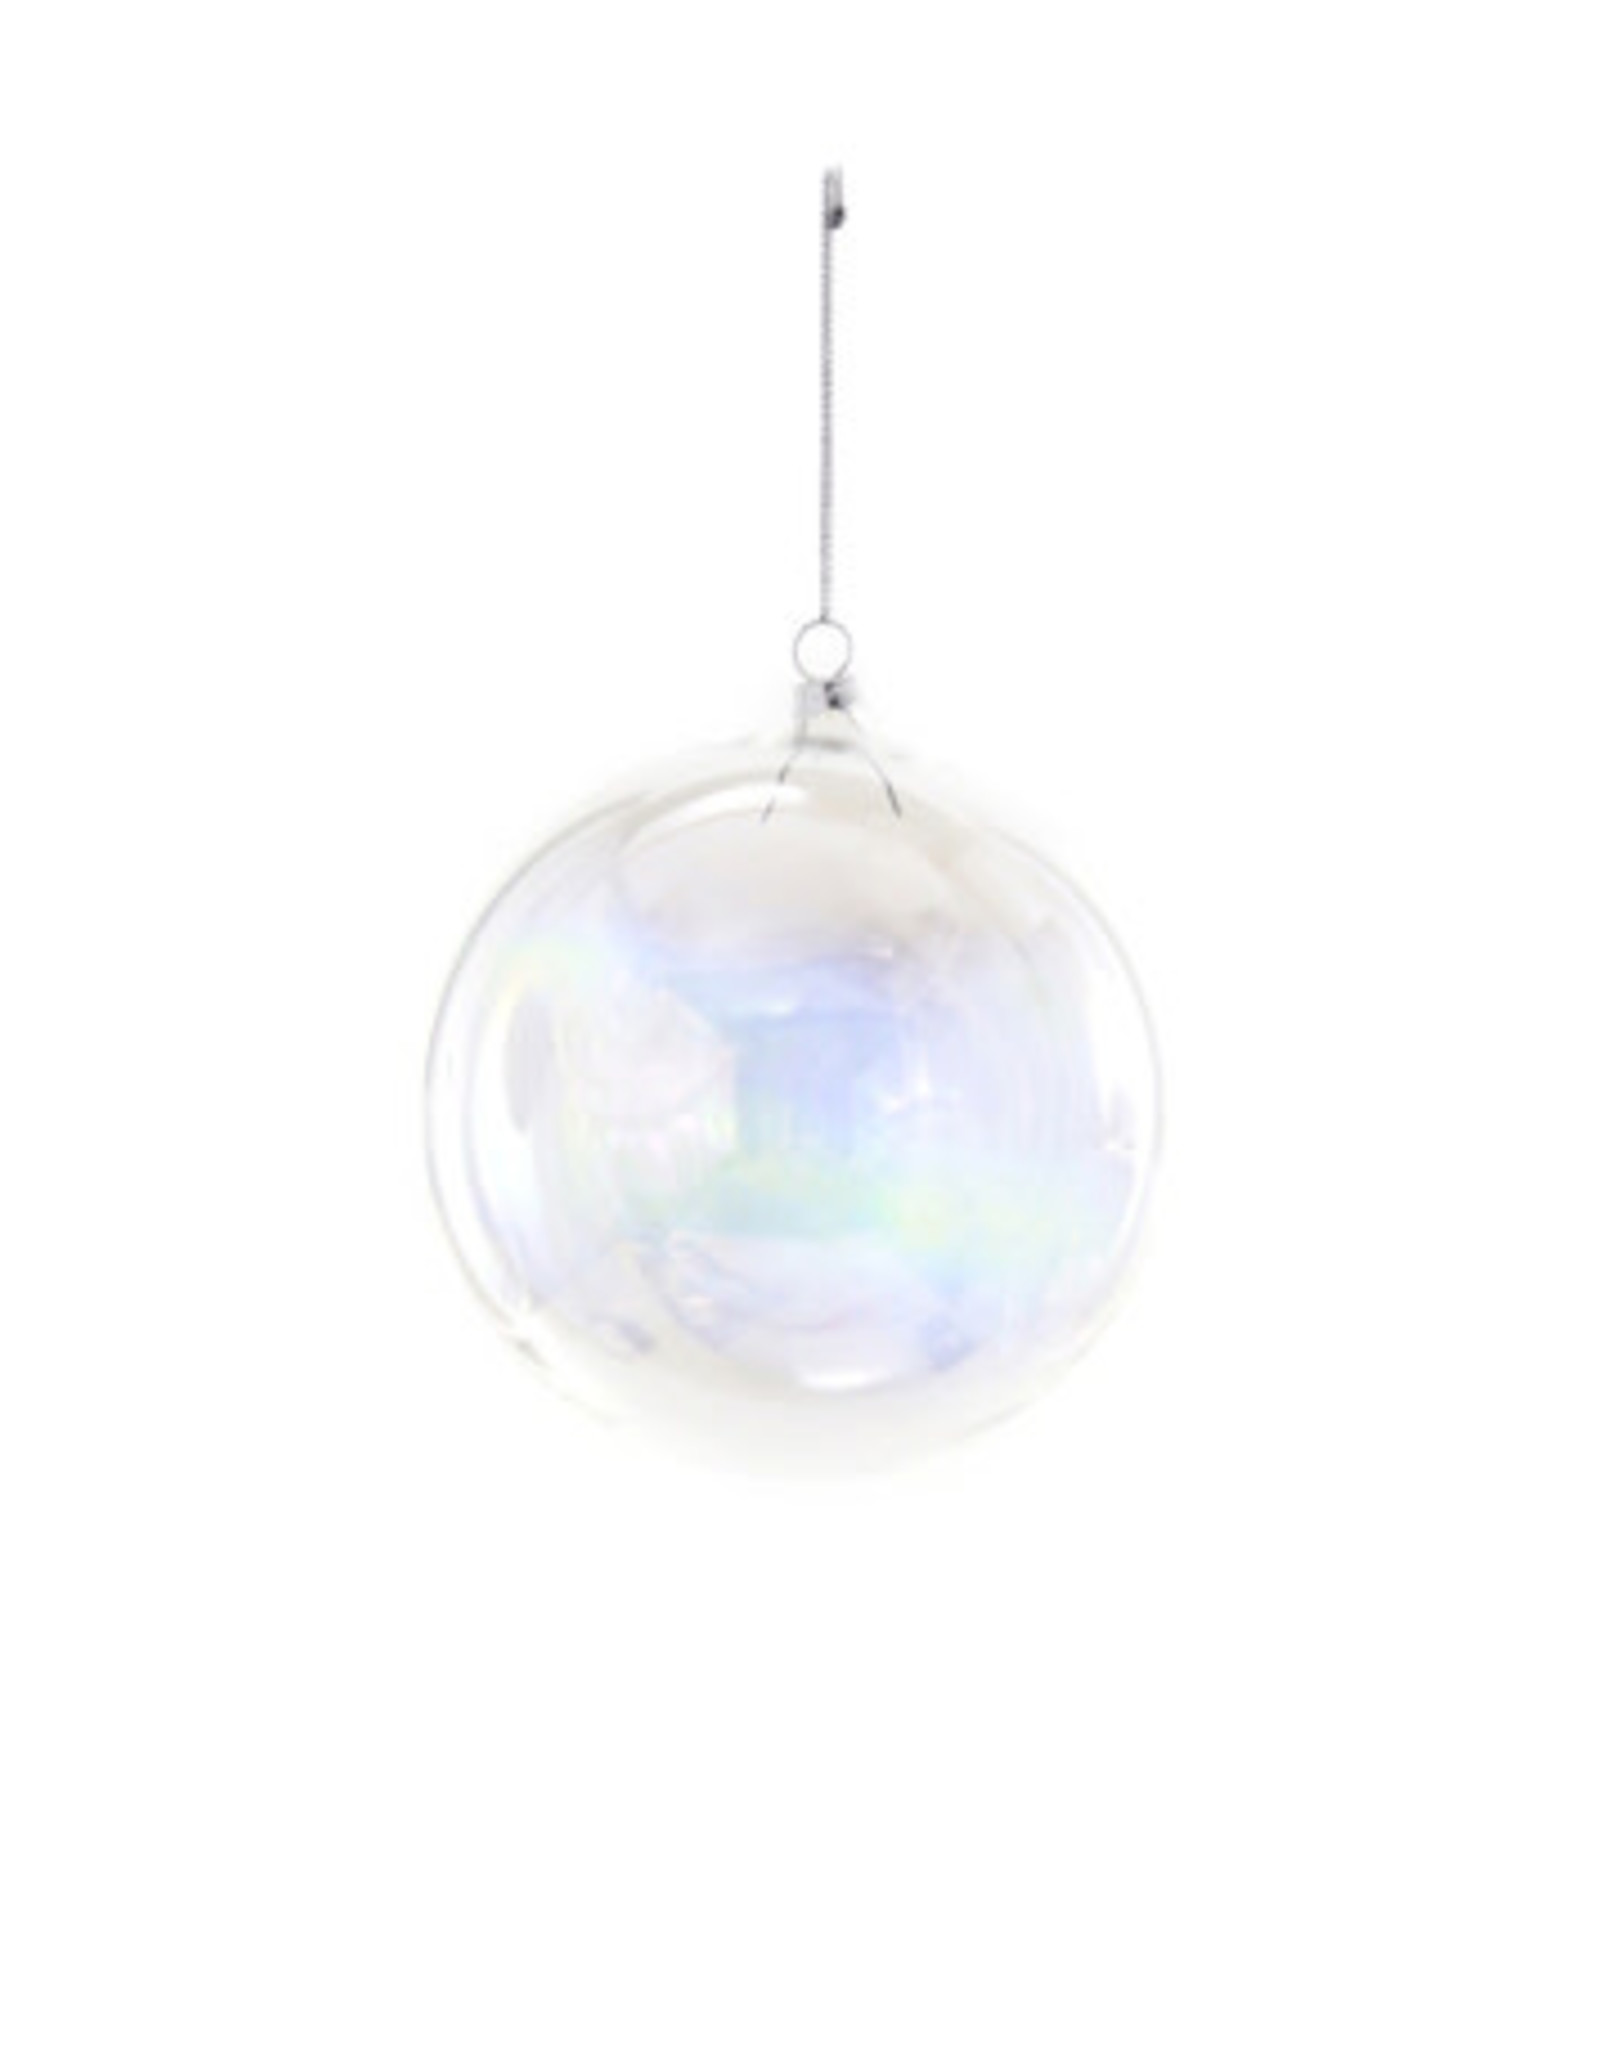 Cody Foster & Co. IRIDESCENT SPECTRUM BAUBLE ORNAMENT - LARGE